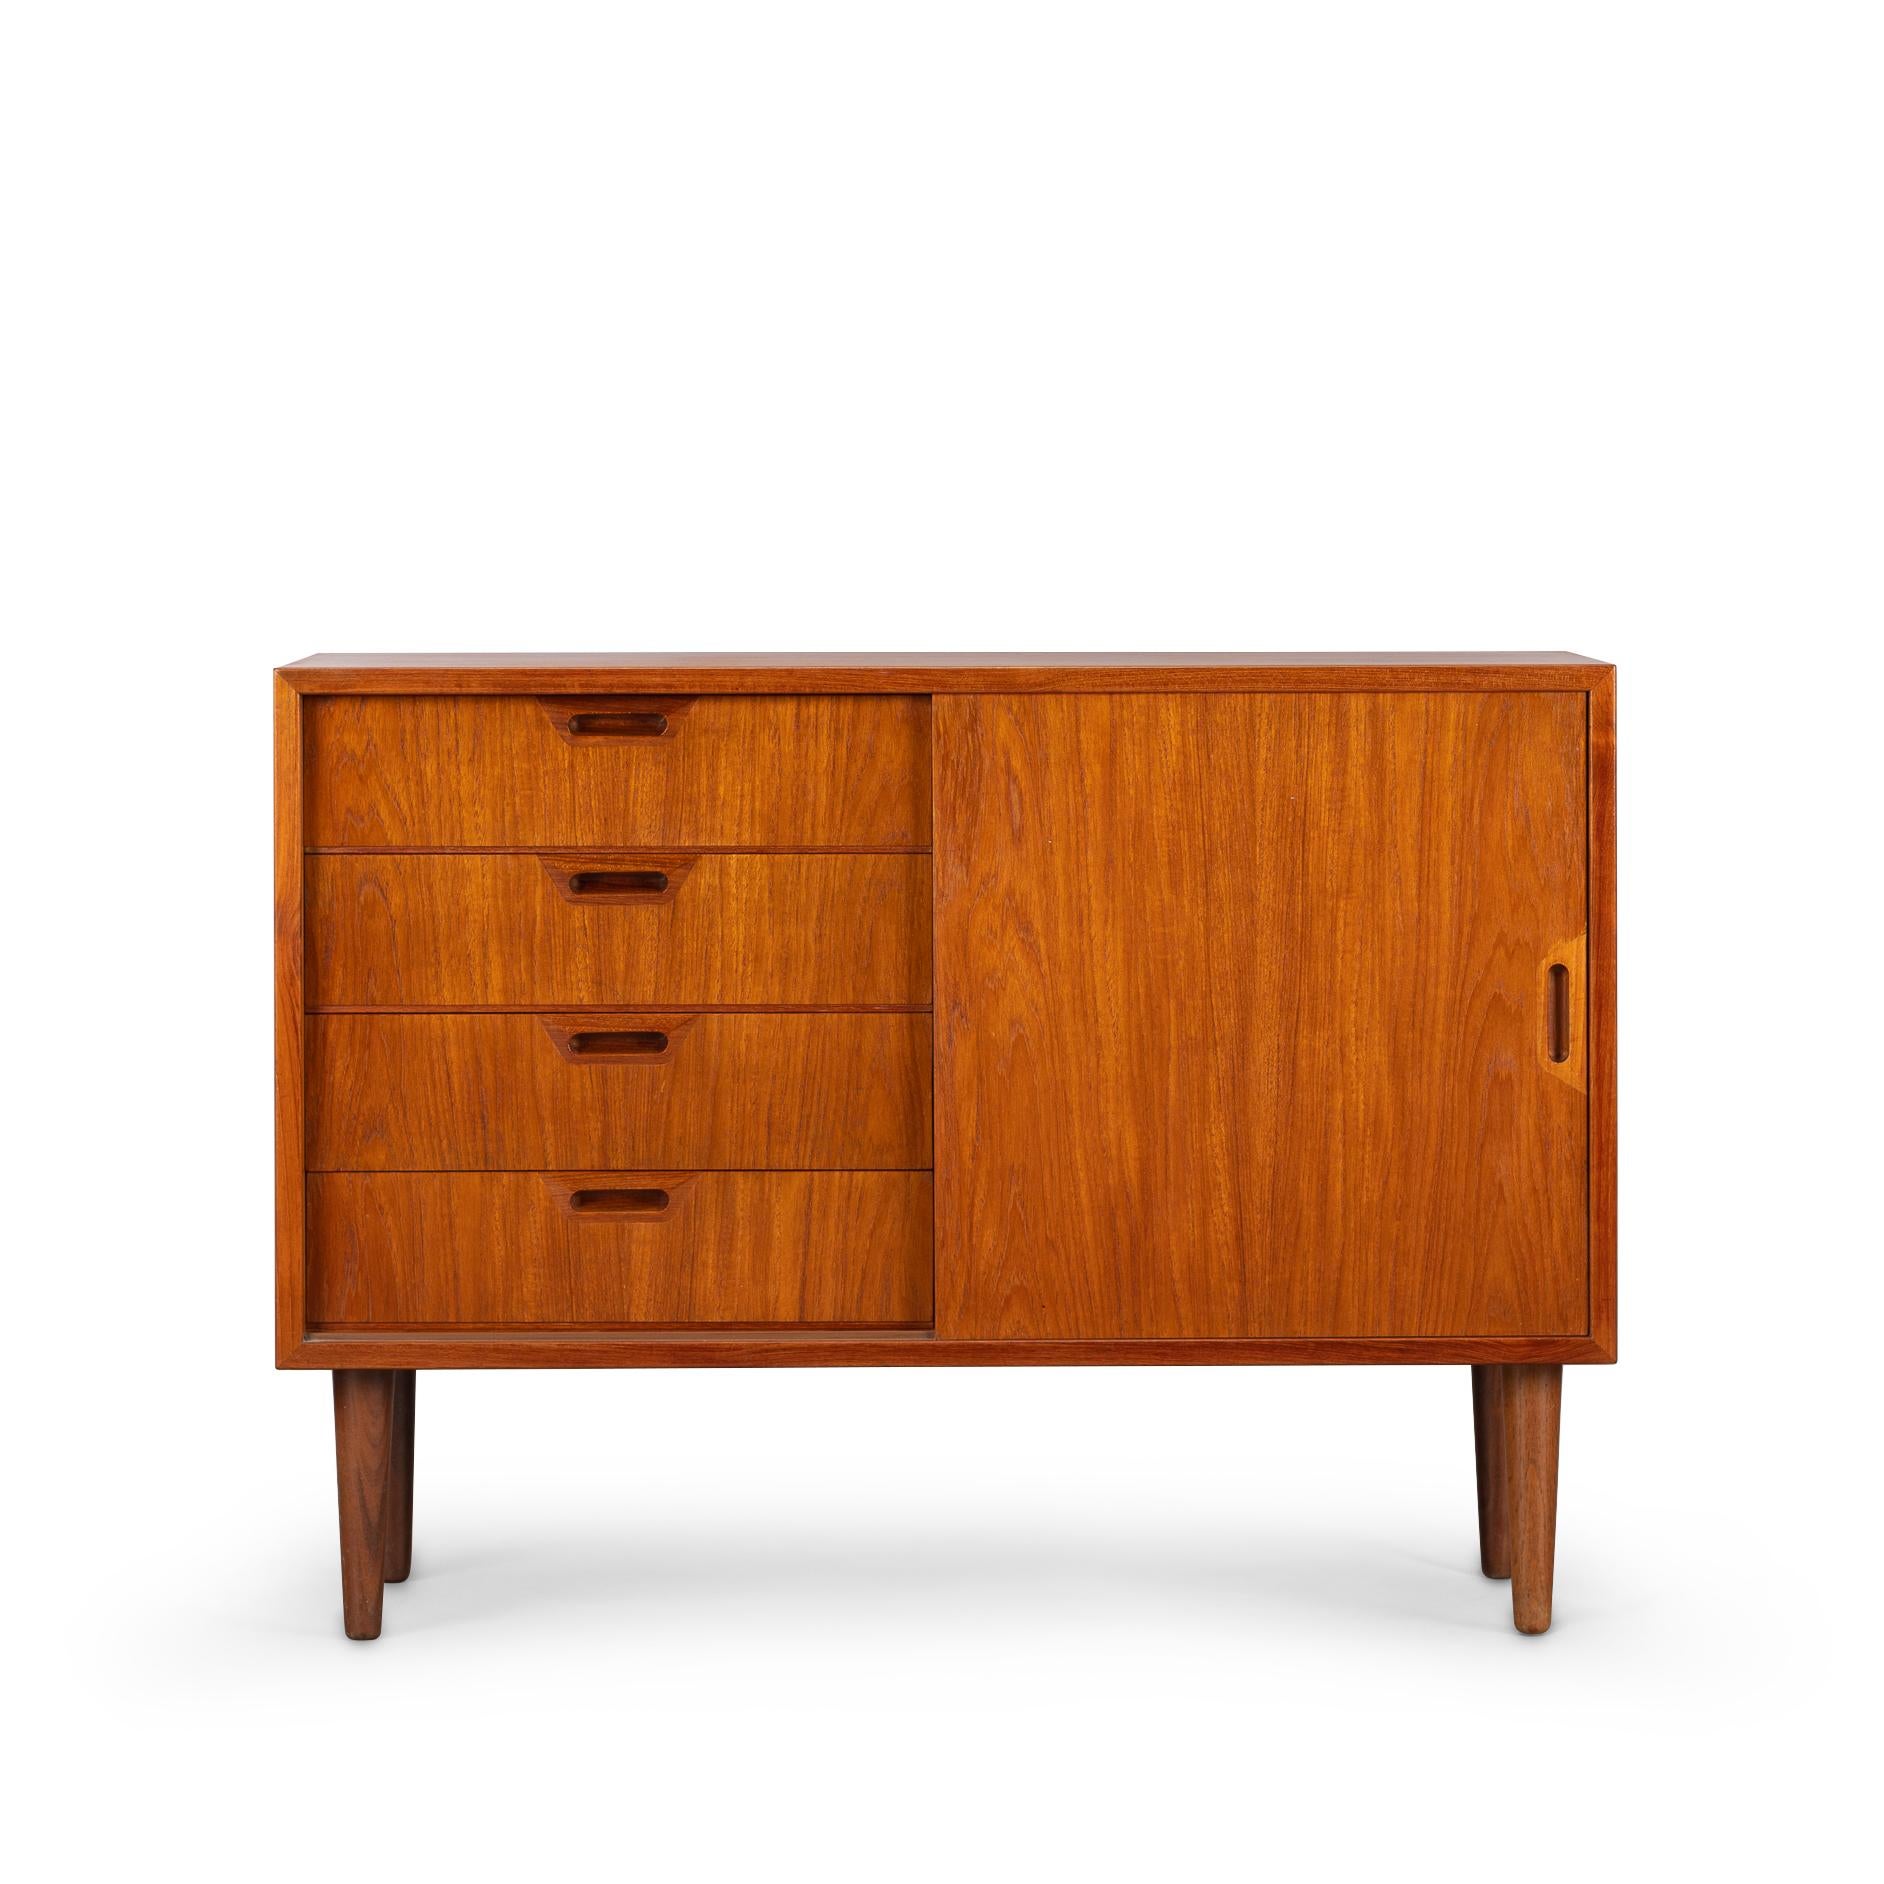 Flashy sideboard in teak in which you can hide all your pleasures. The color is a beautiful reddish teak. The cool flush cut grips are the key feature that makes this one a true eye catcher. On the inside there is all you need with good sized